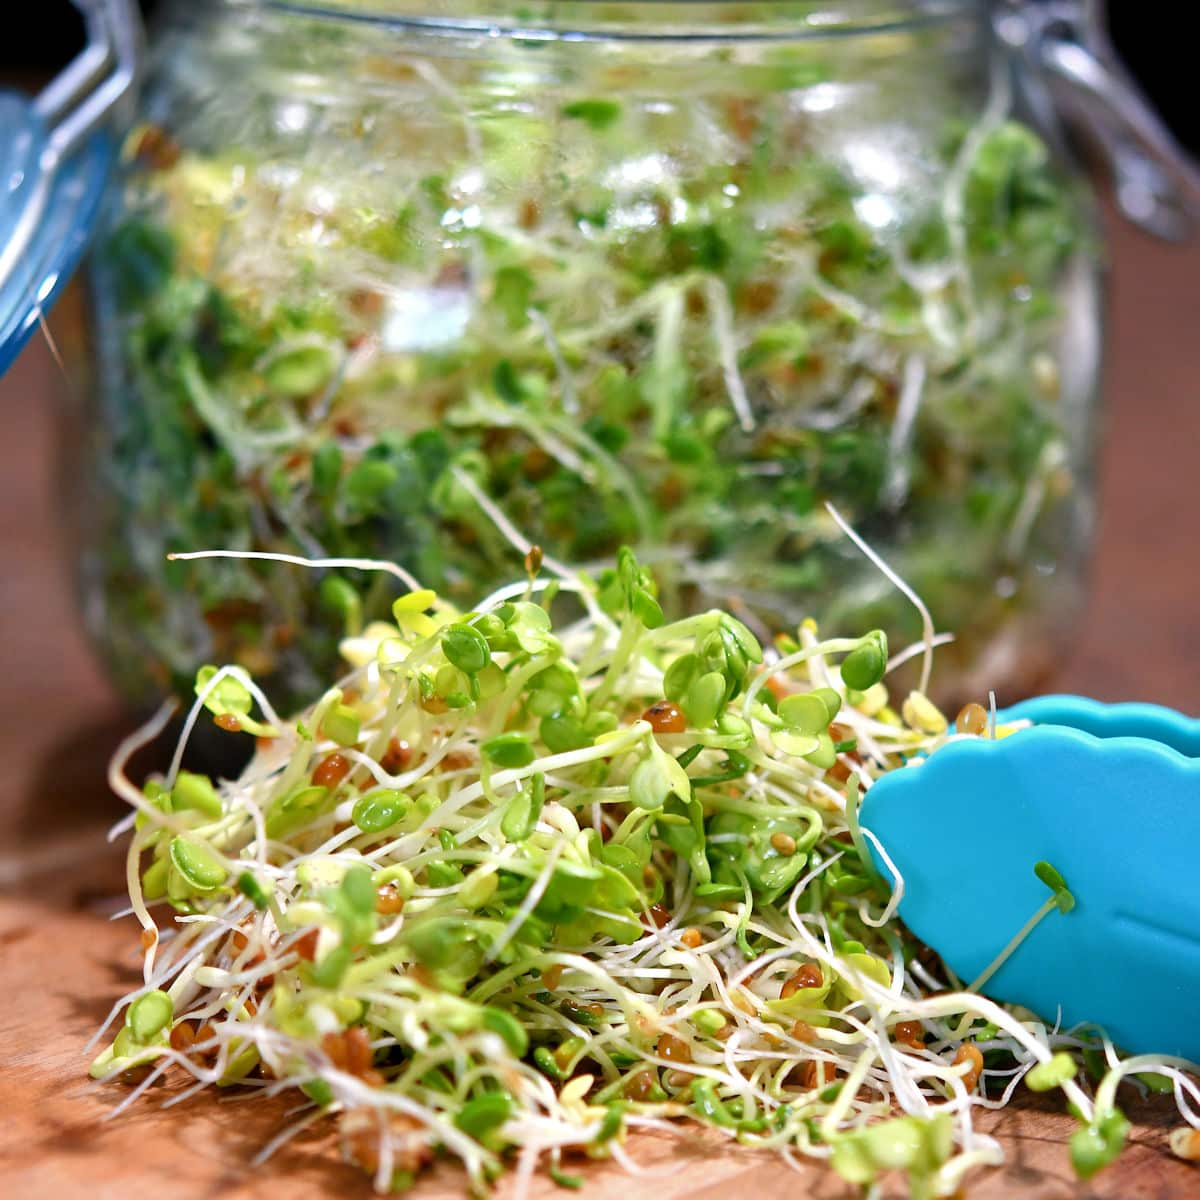 24Bite: Grow Your Own Alfalfa Sprouts Microgreens by Christian Guzman